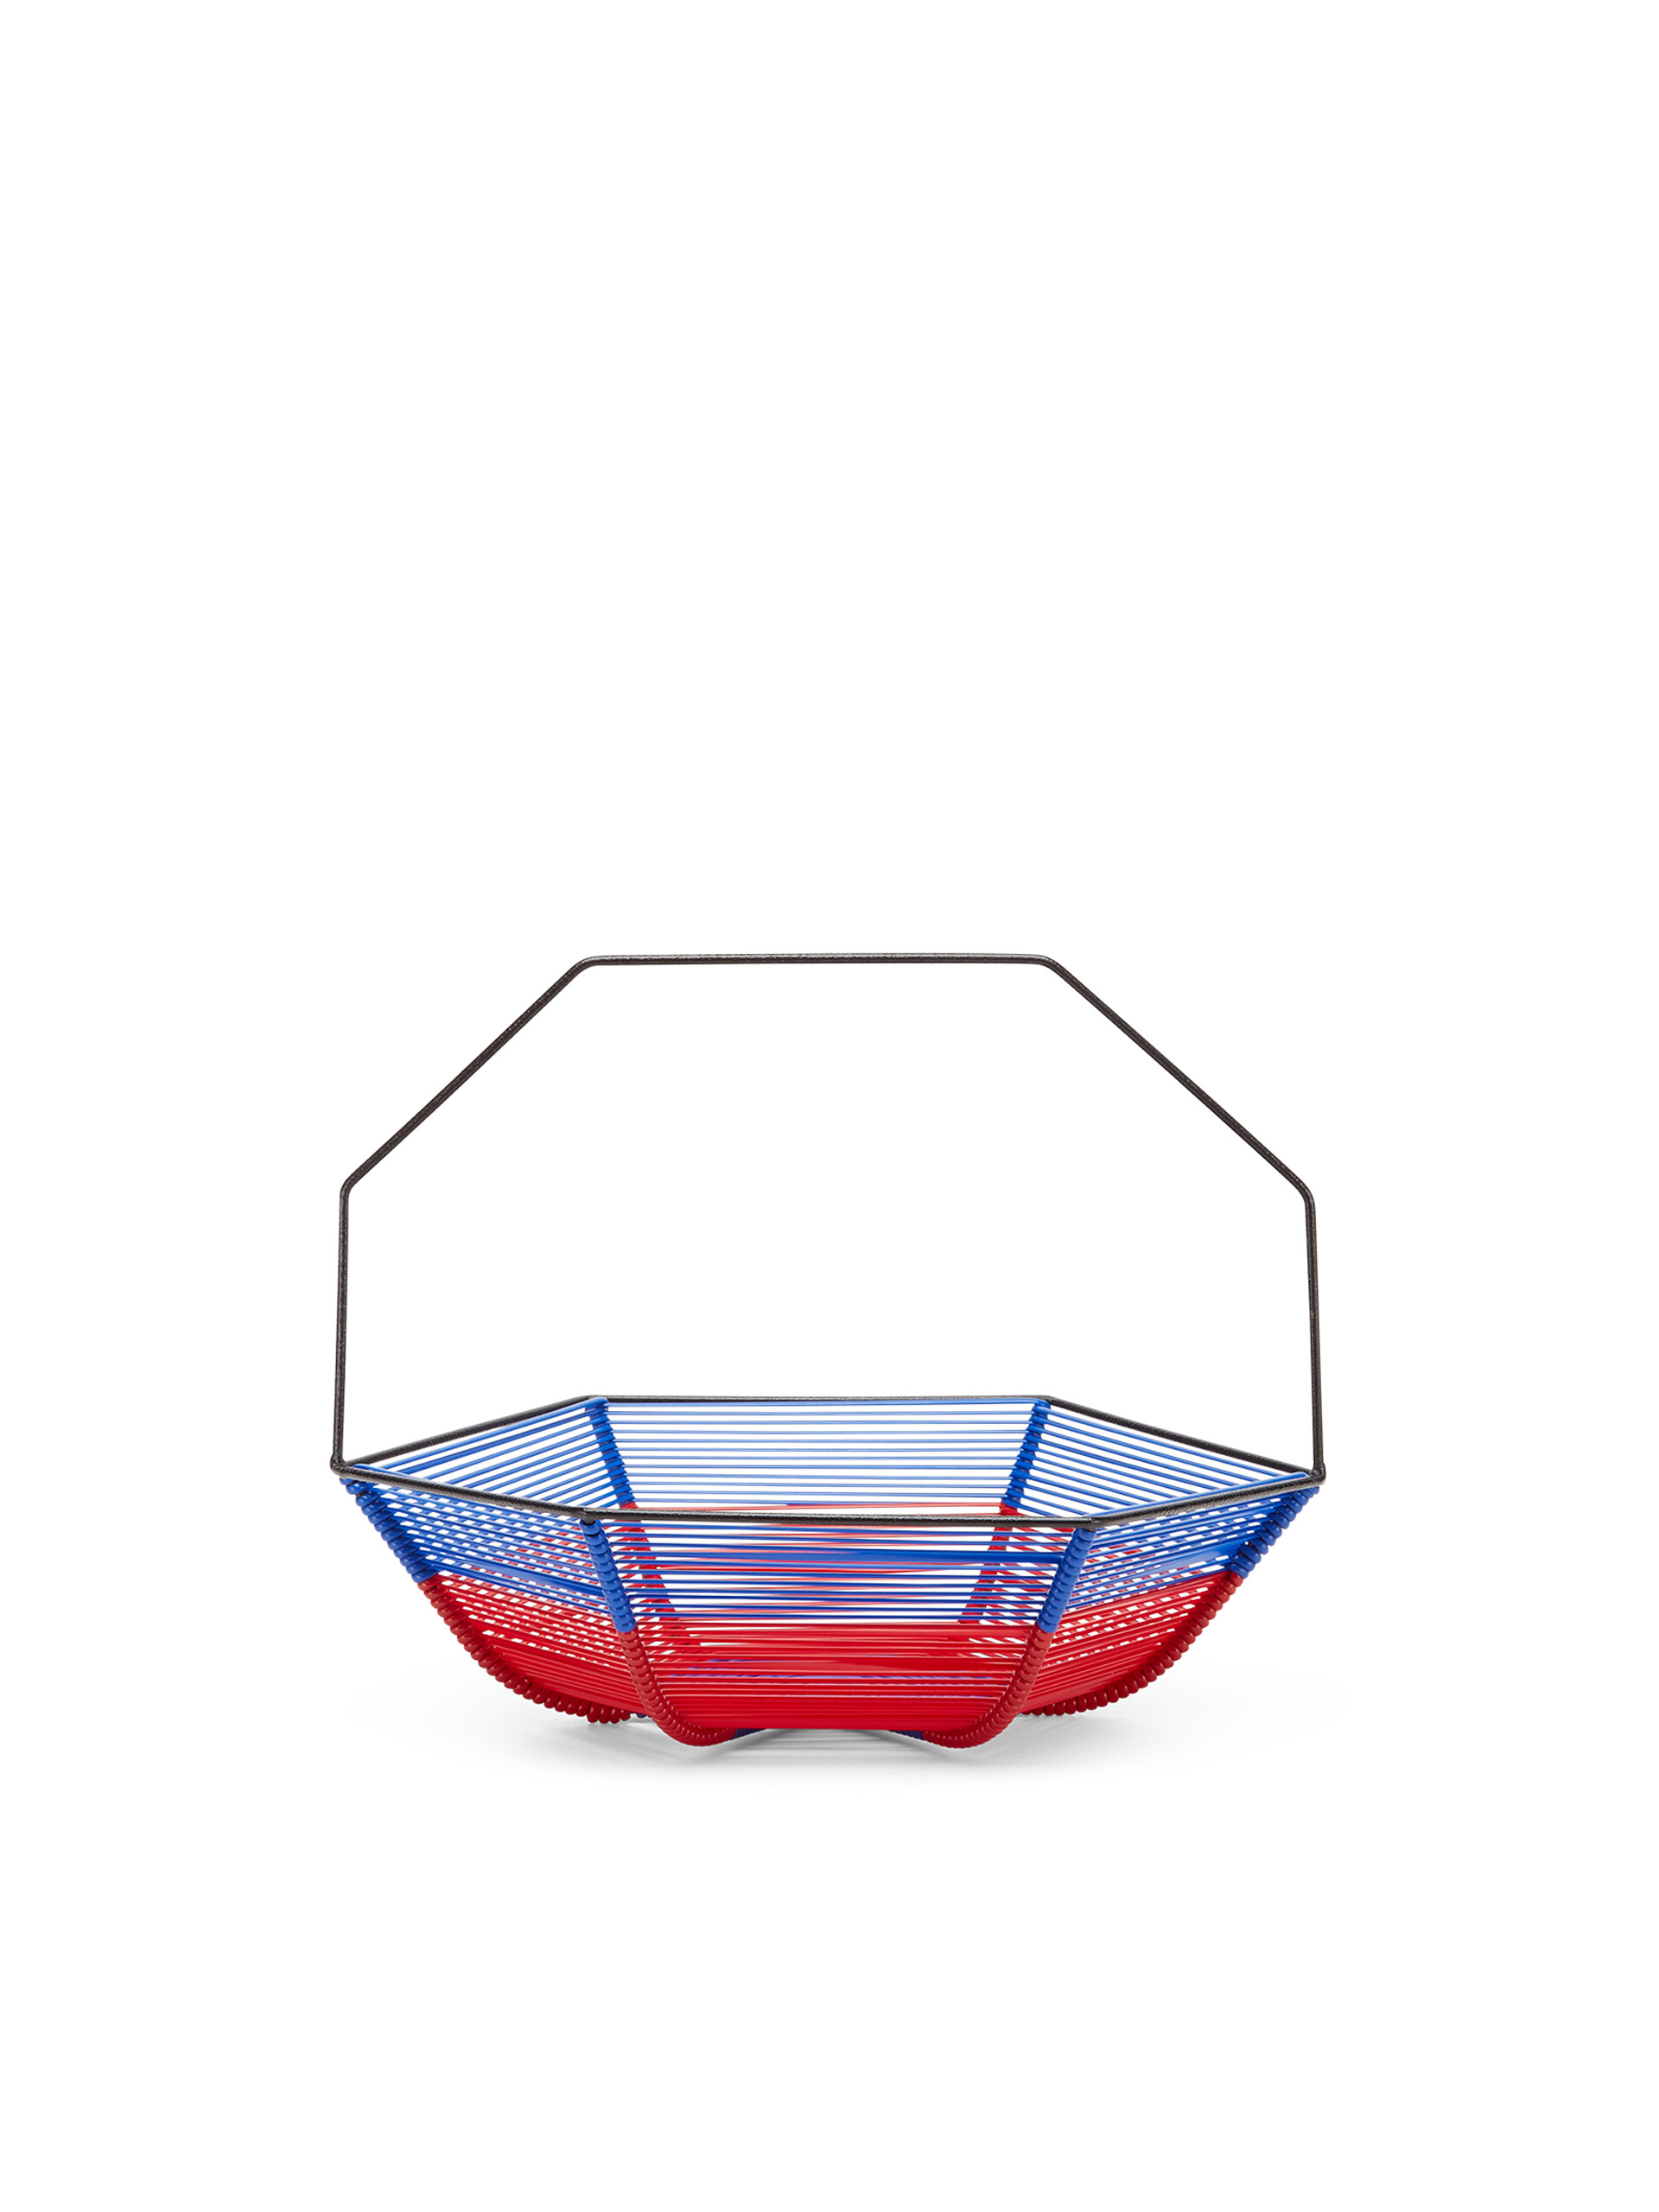 MARNI MARKET hexagonal blue and red fruit holder - Accessories - Image 3